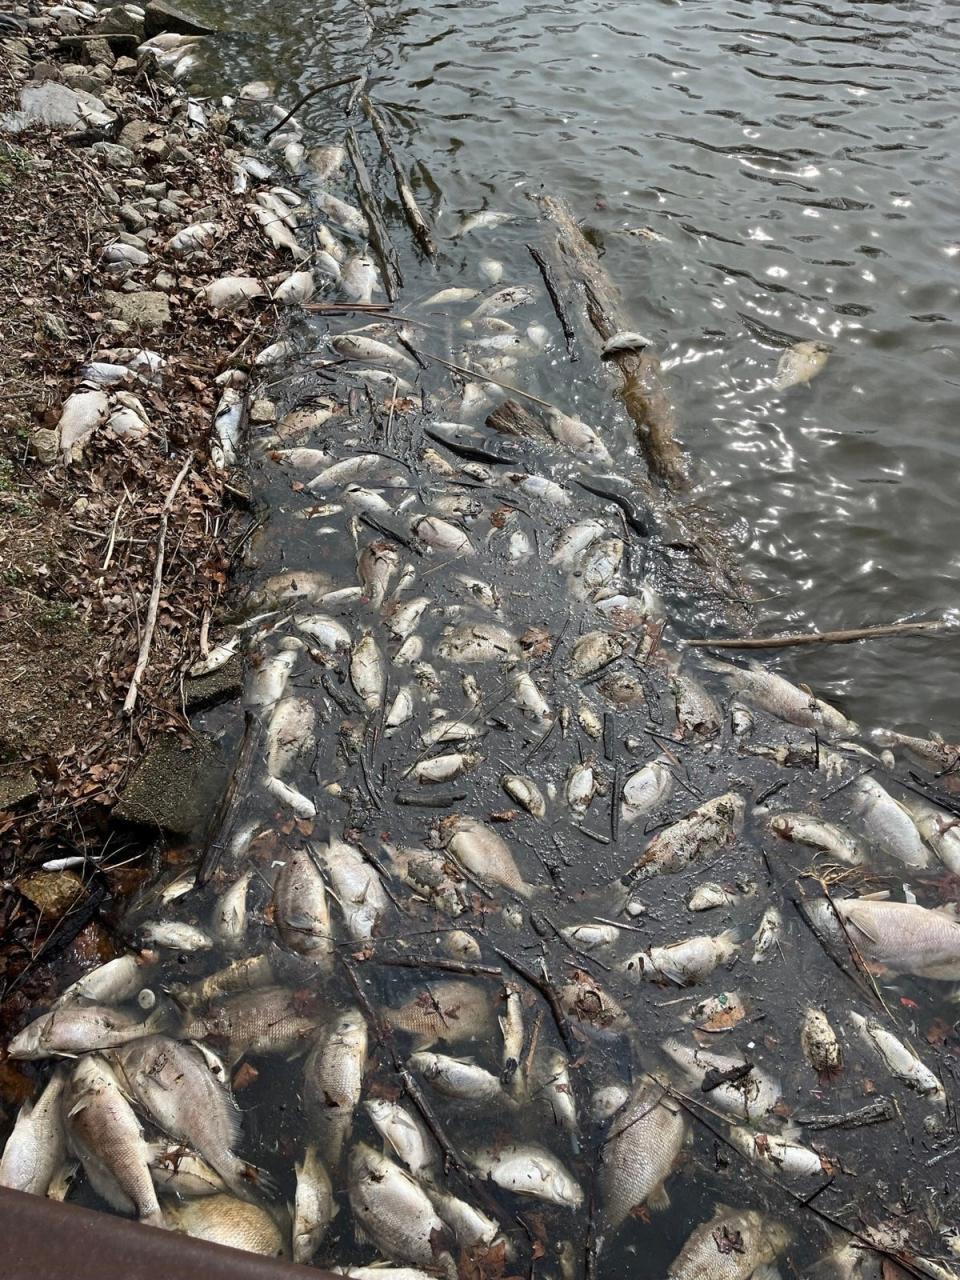 Dead fish from Lake Macatawa in Ottawa County. The confirmed cause of this fish die-off is viral hemorrhagic septicemia.